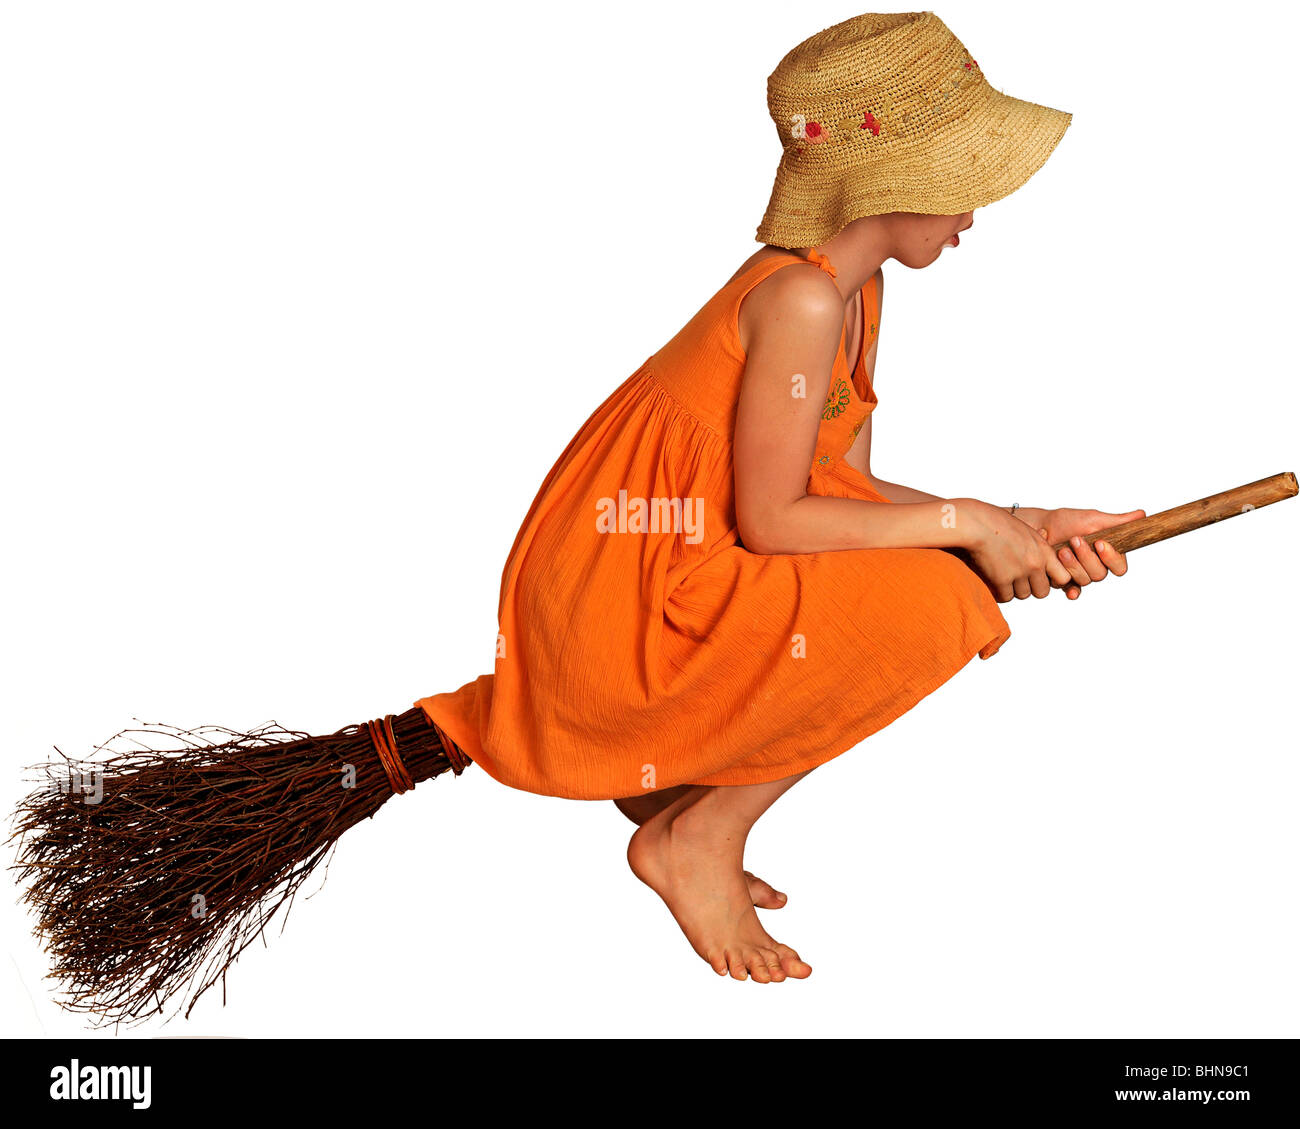 witches, witches' broom, girl riding on broom, historic, historical, children, brushwood, bundle of sticks, flying, Sabbath, carnival, child, magic, clipping, cut out, cut-out, cut-outs, people, Stock Photo